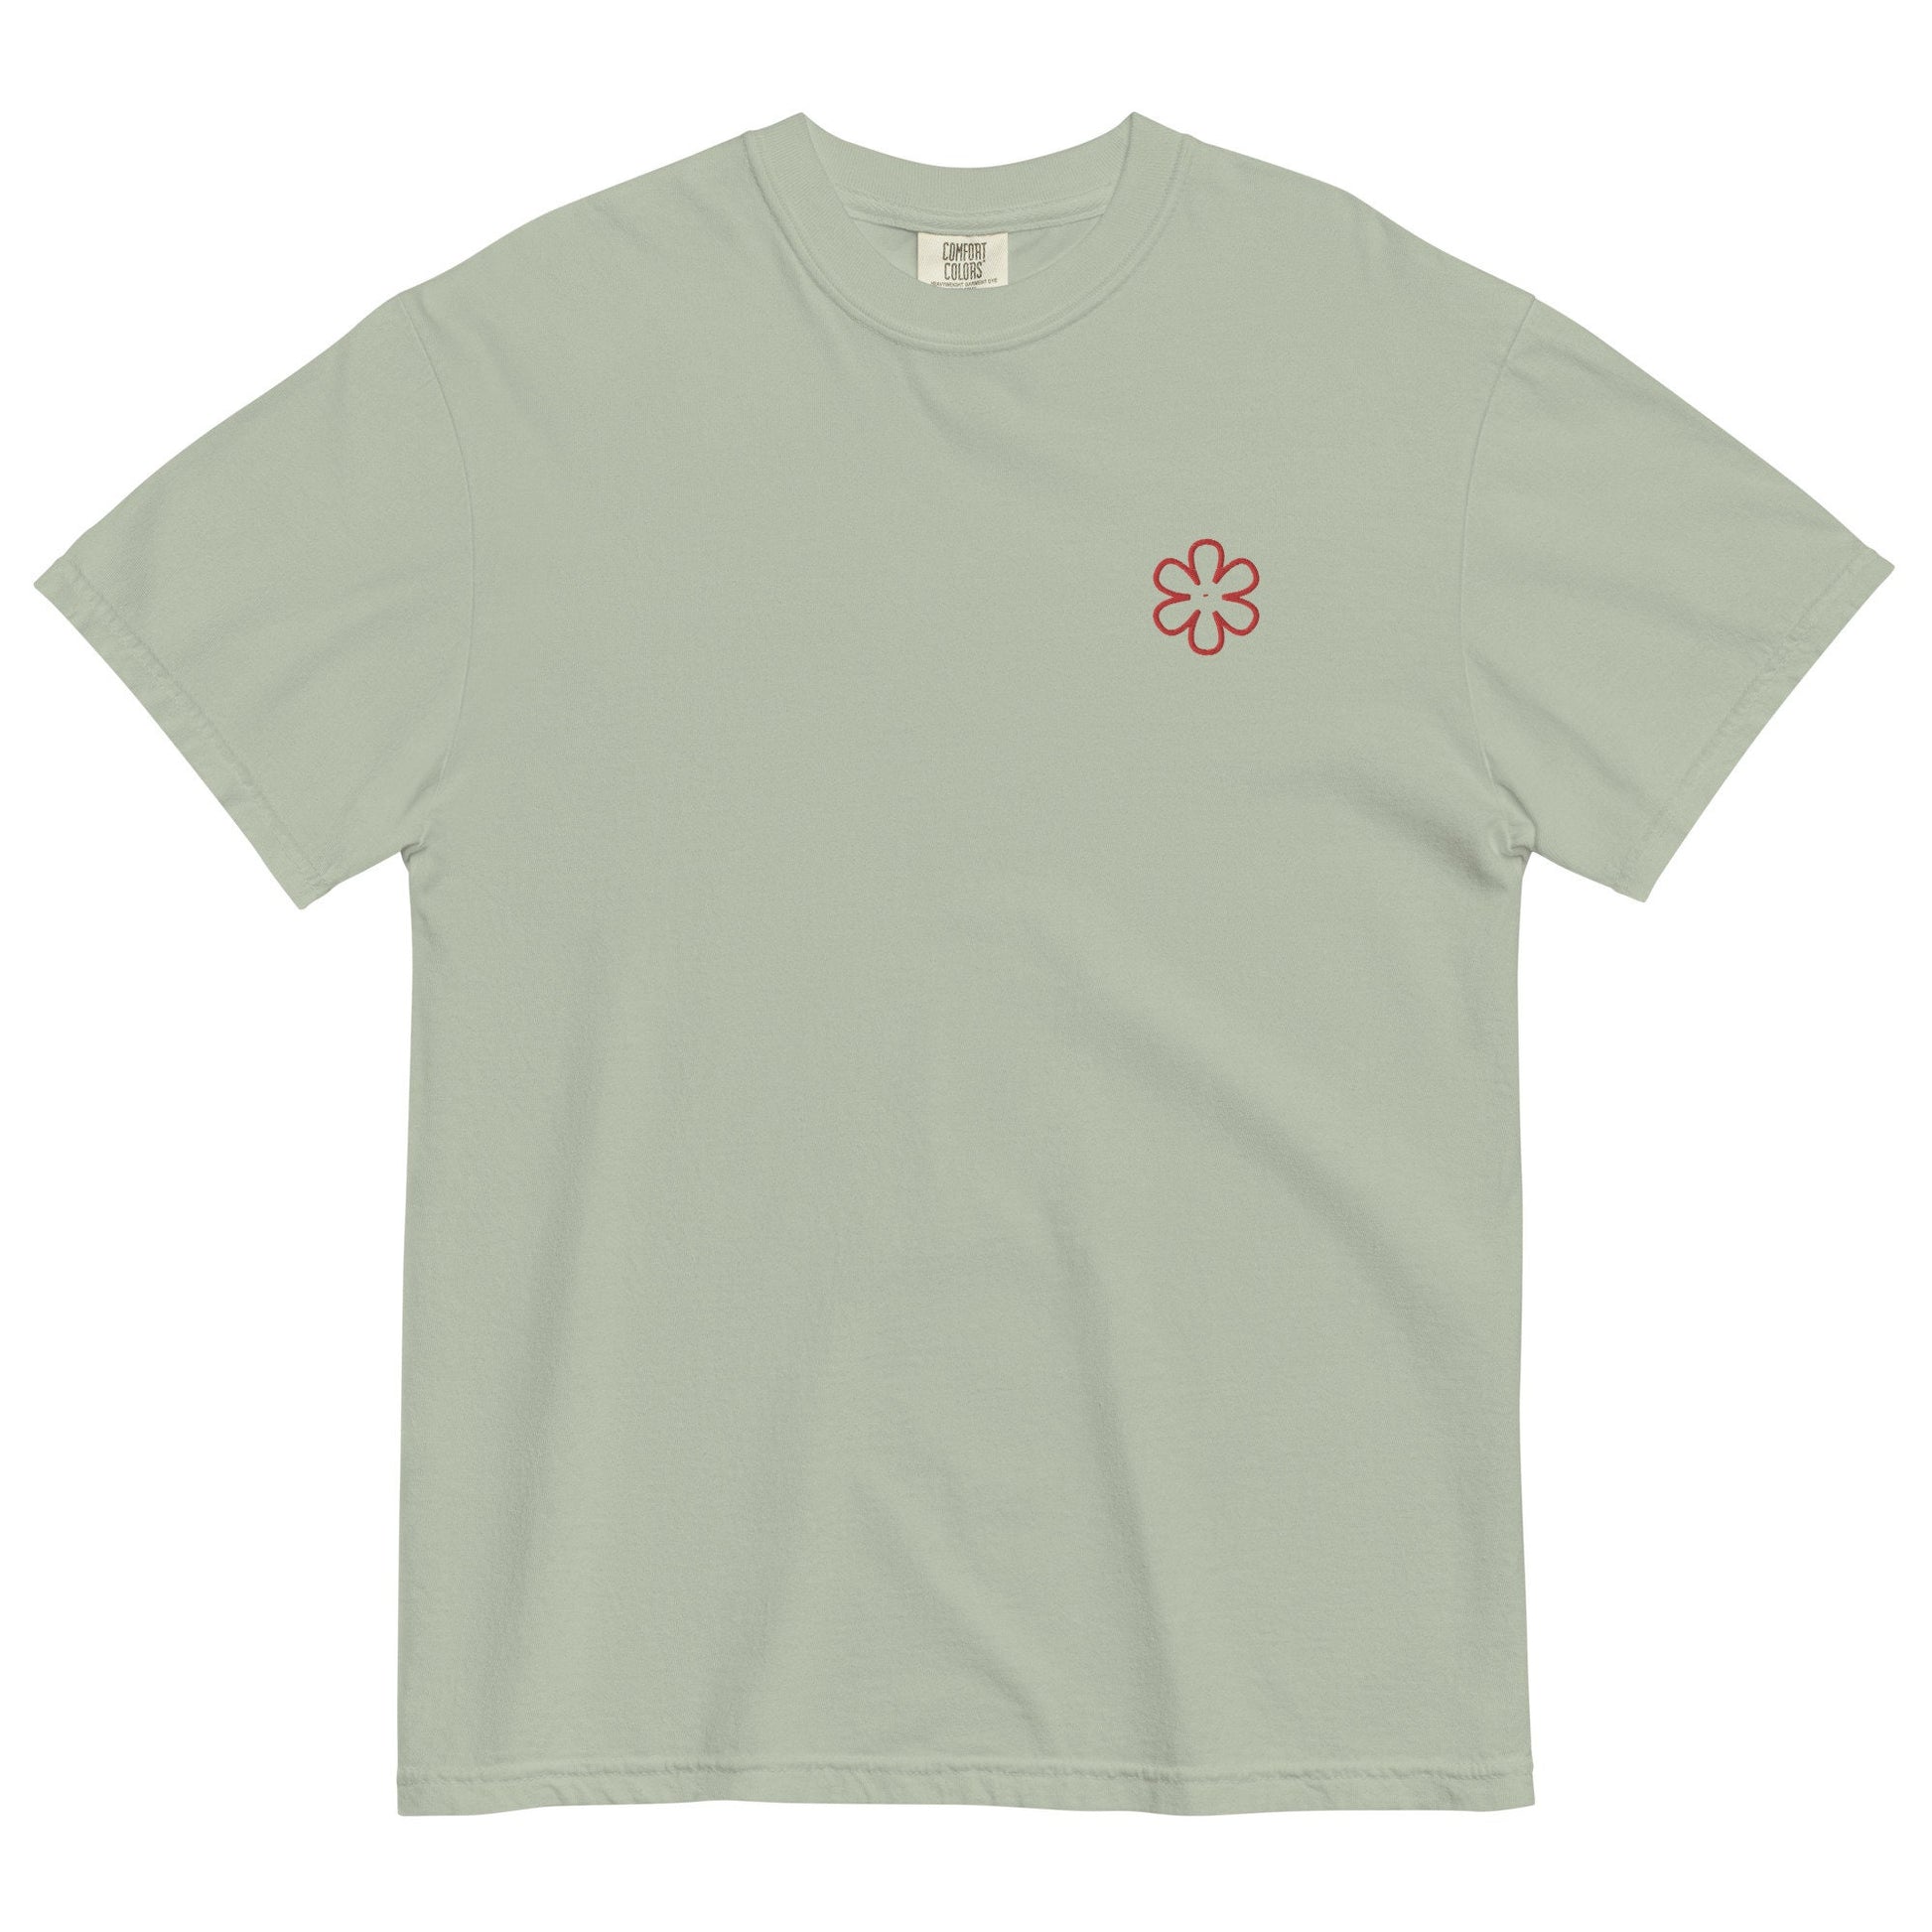 Culinary Star T Shirt - Gift for Foodies & Restauranteur - Minimalist Embroidered Cotton Shirt